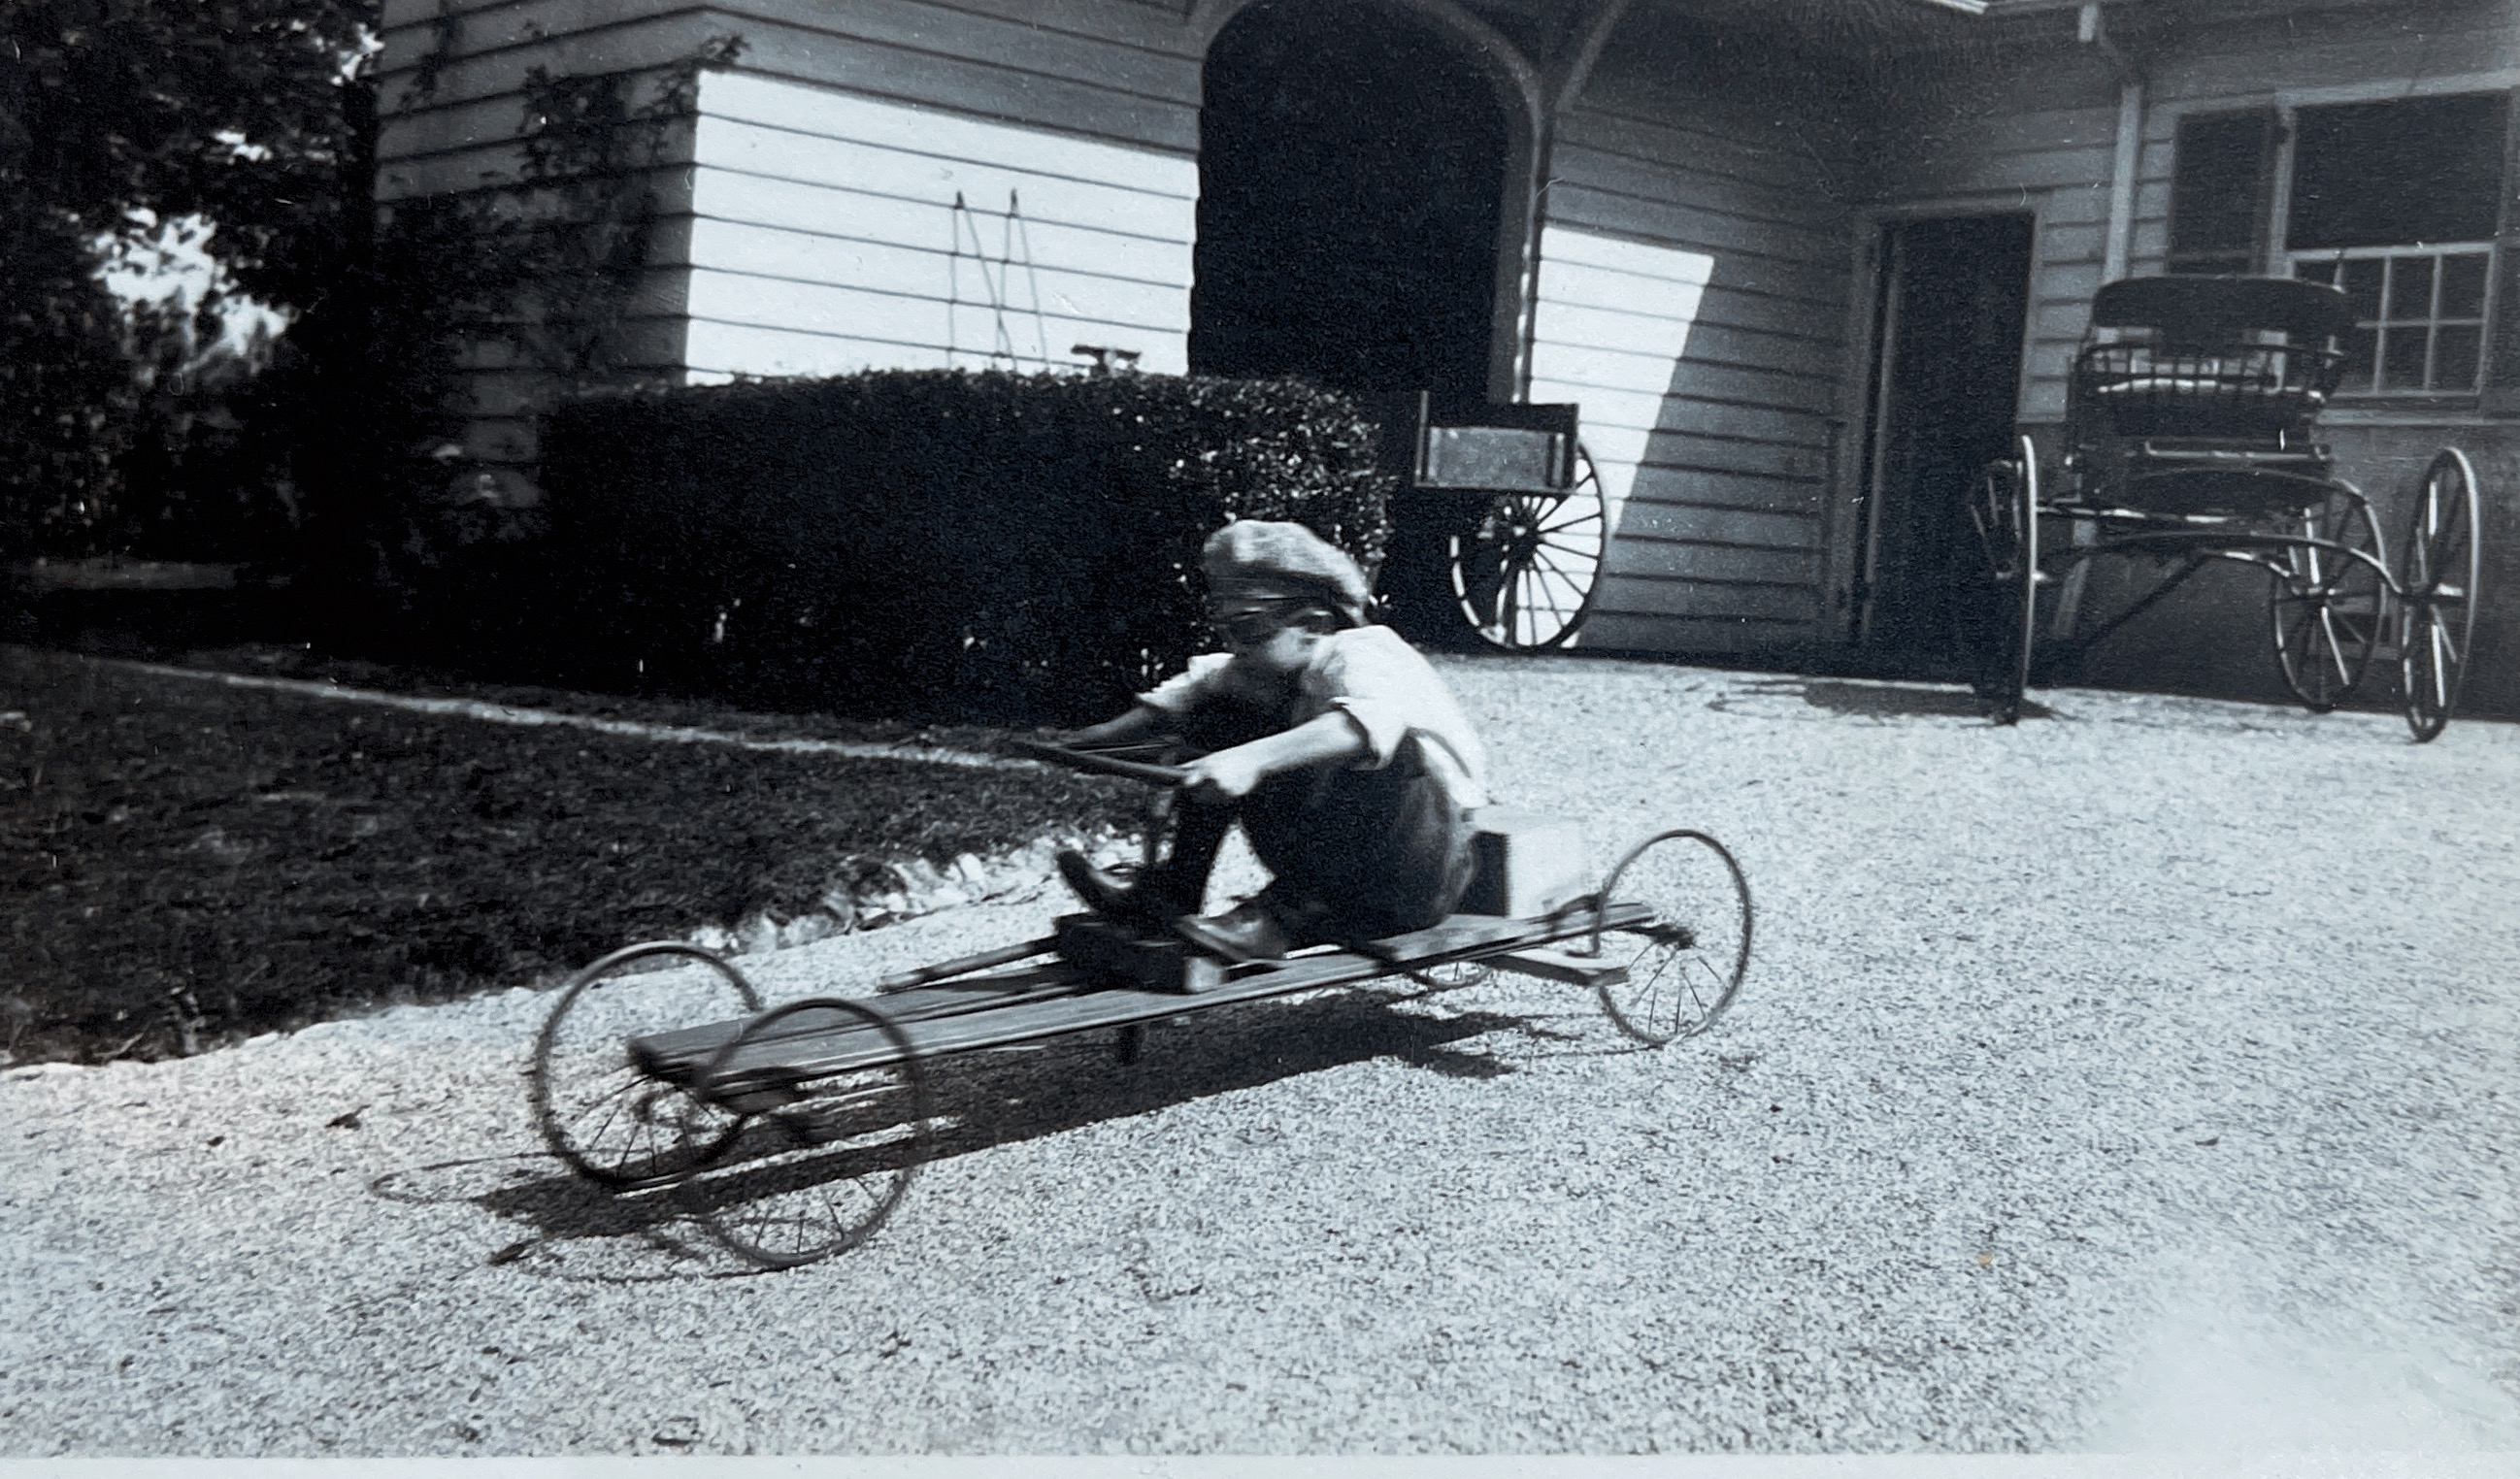 My grandfather, Jack Sherman, aged 12 in 1913.